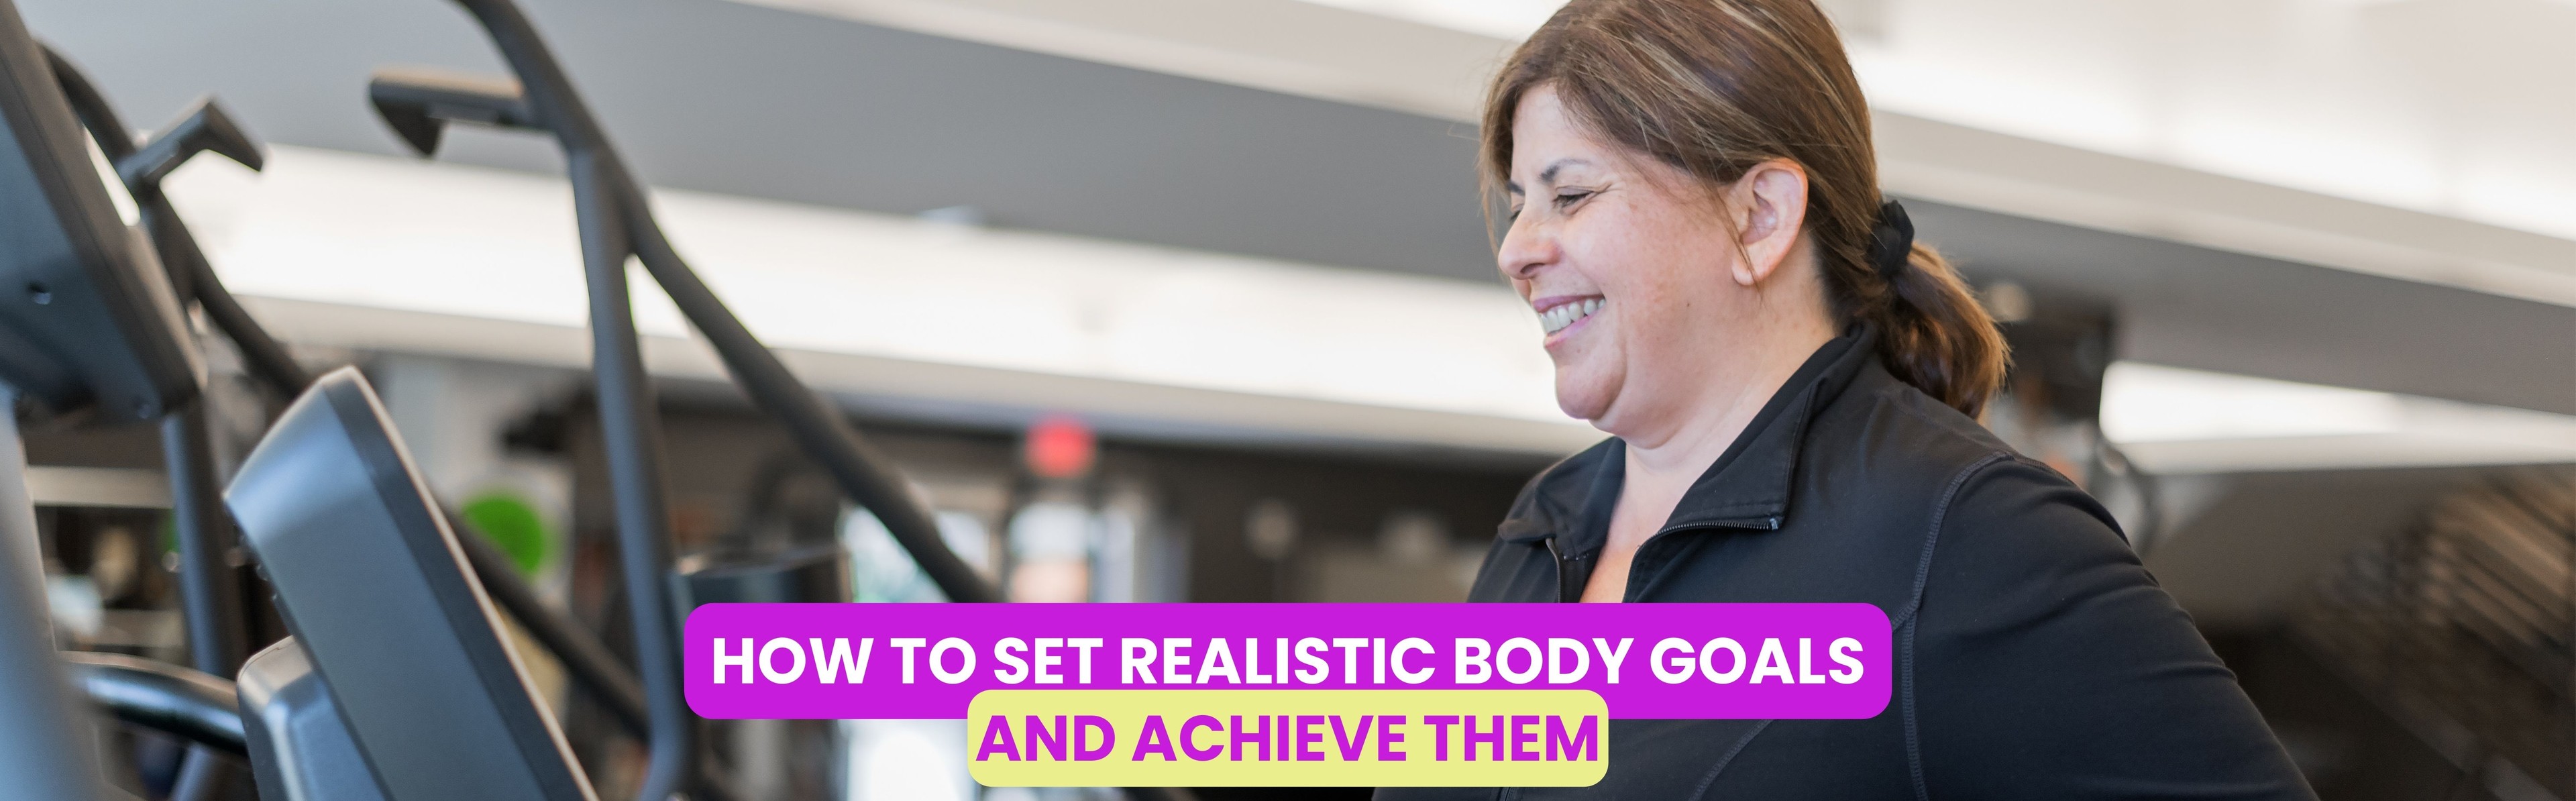 How to Set Realistic Body Goals and Achieve Them